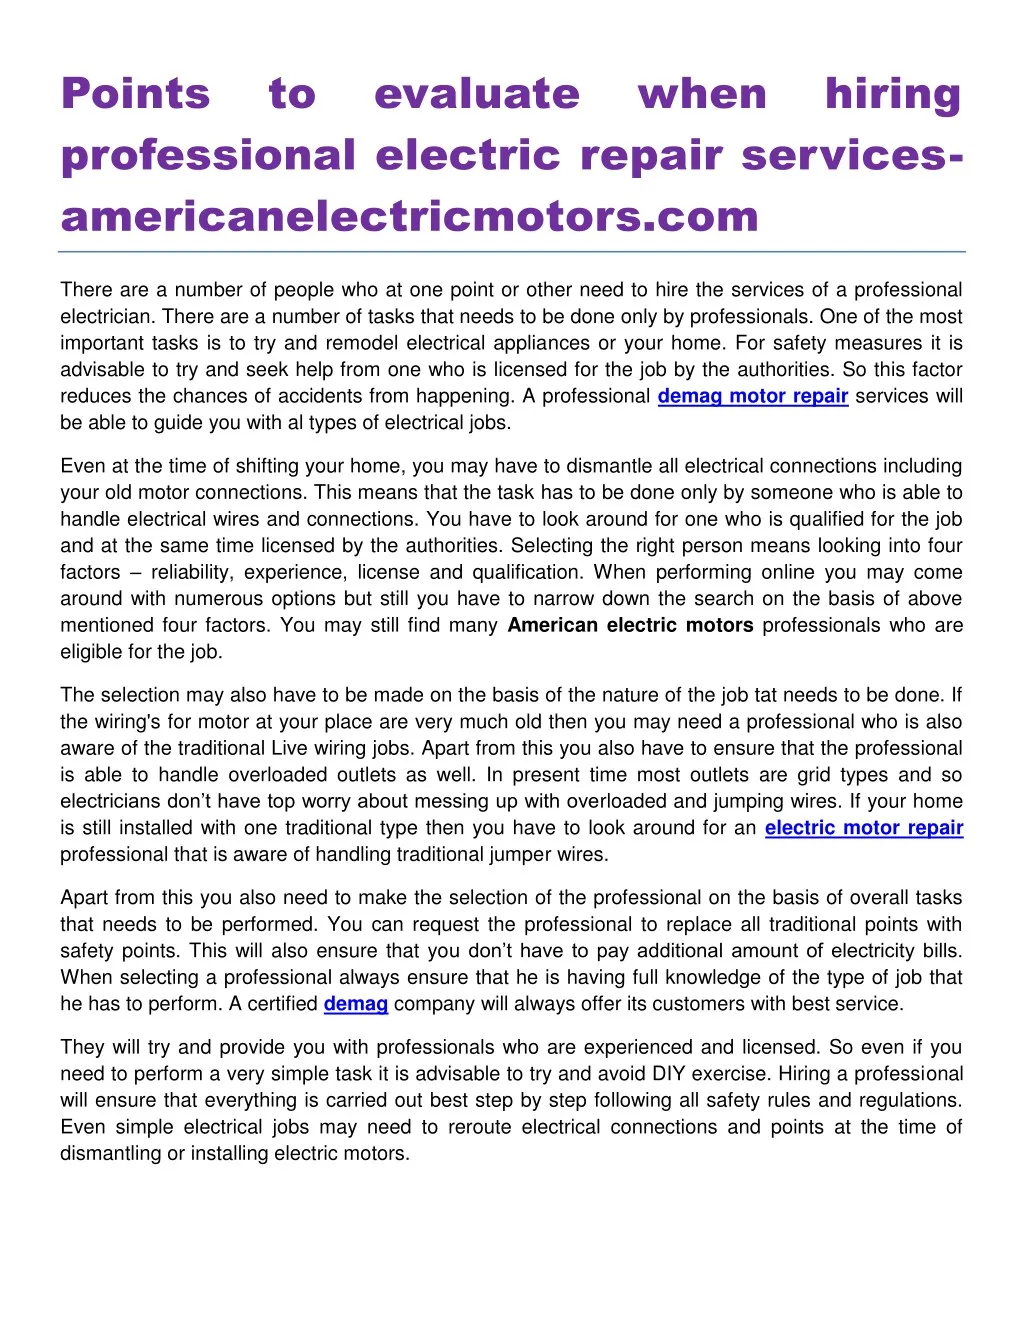 points professional electric repair services